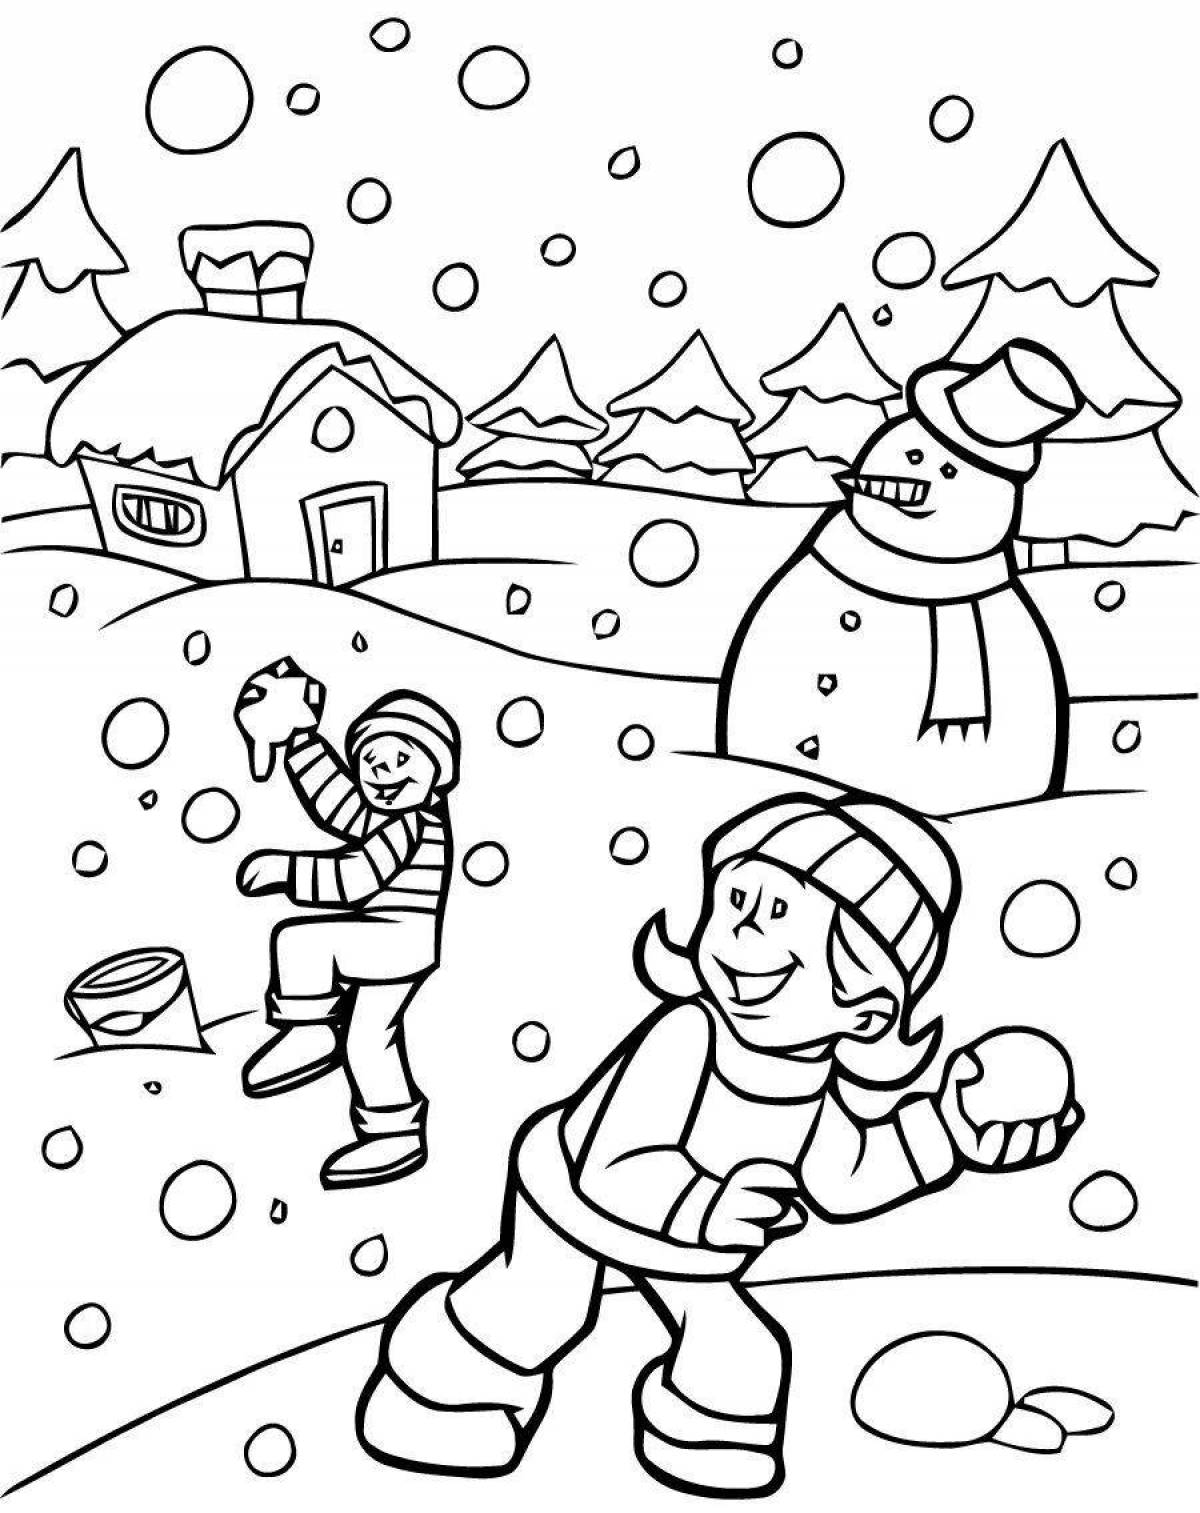 Shiny winter day coloring for kids